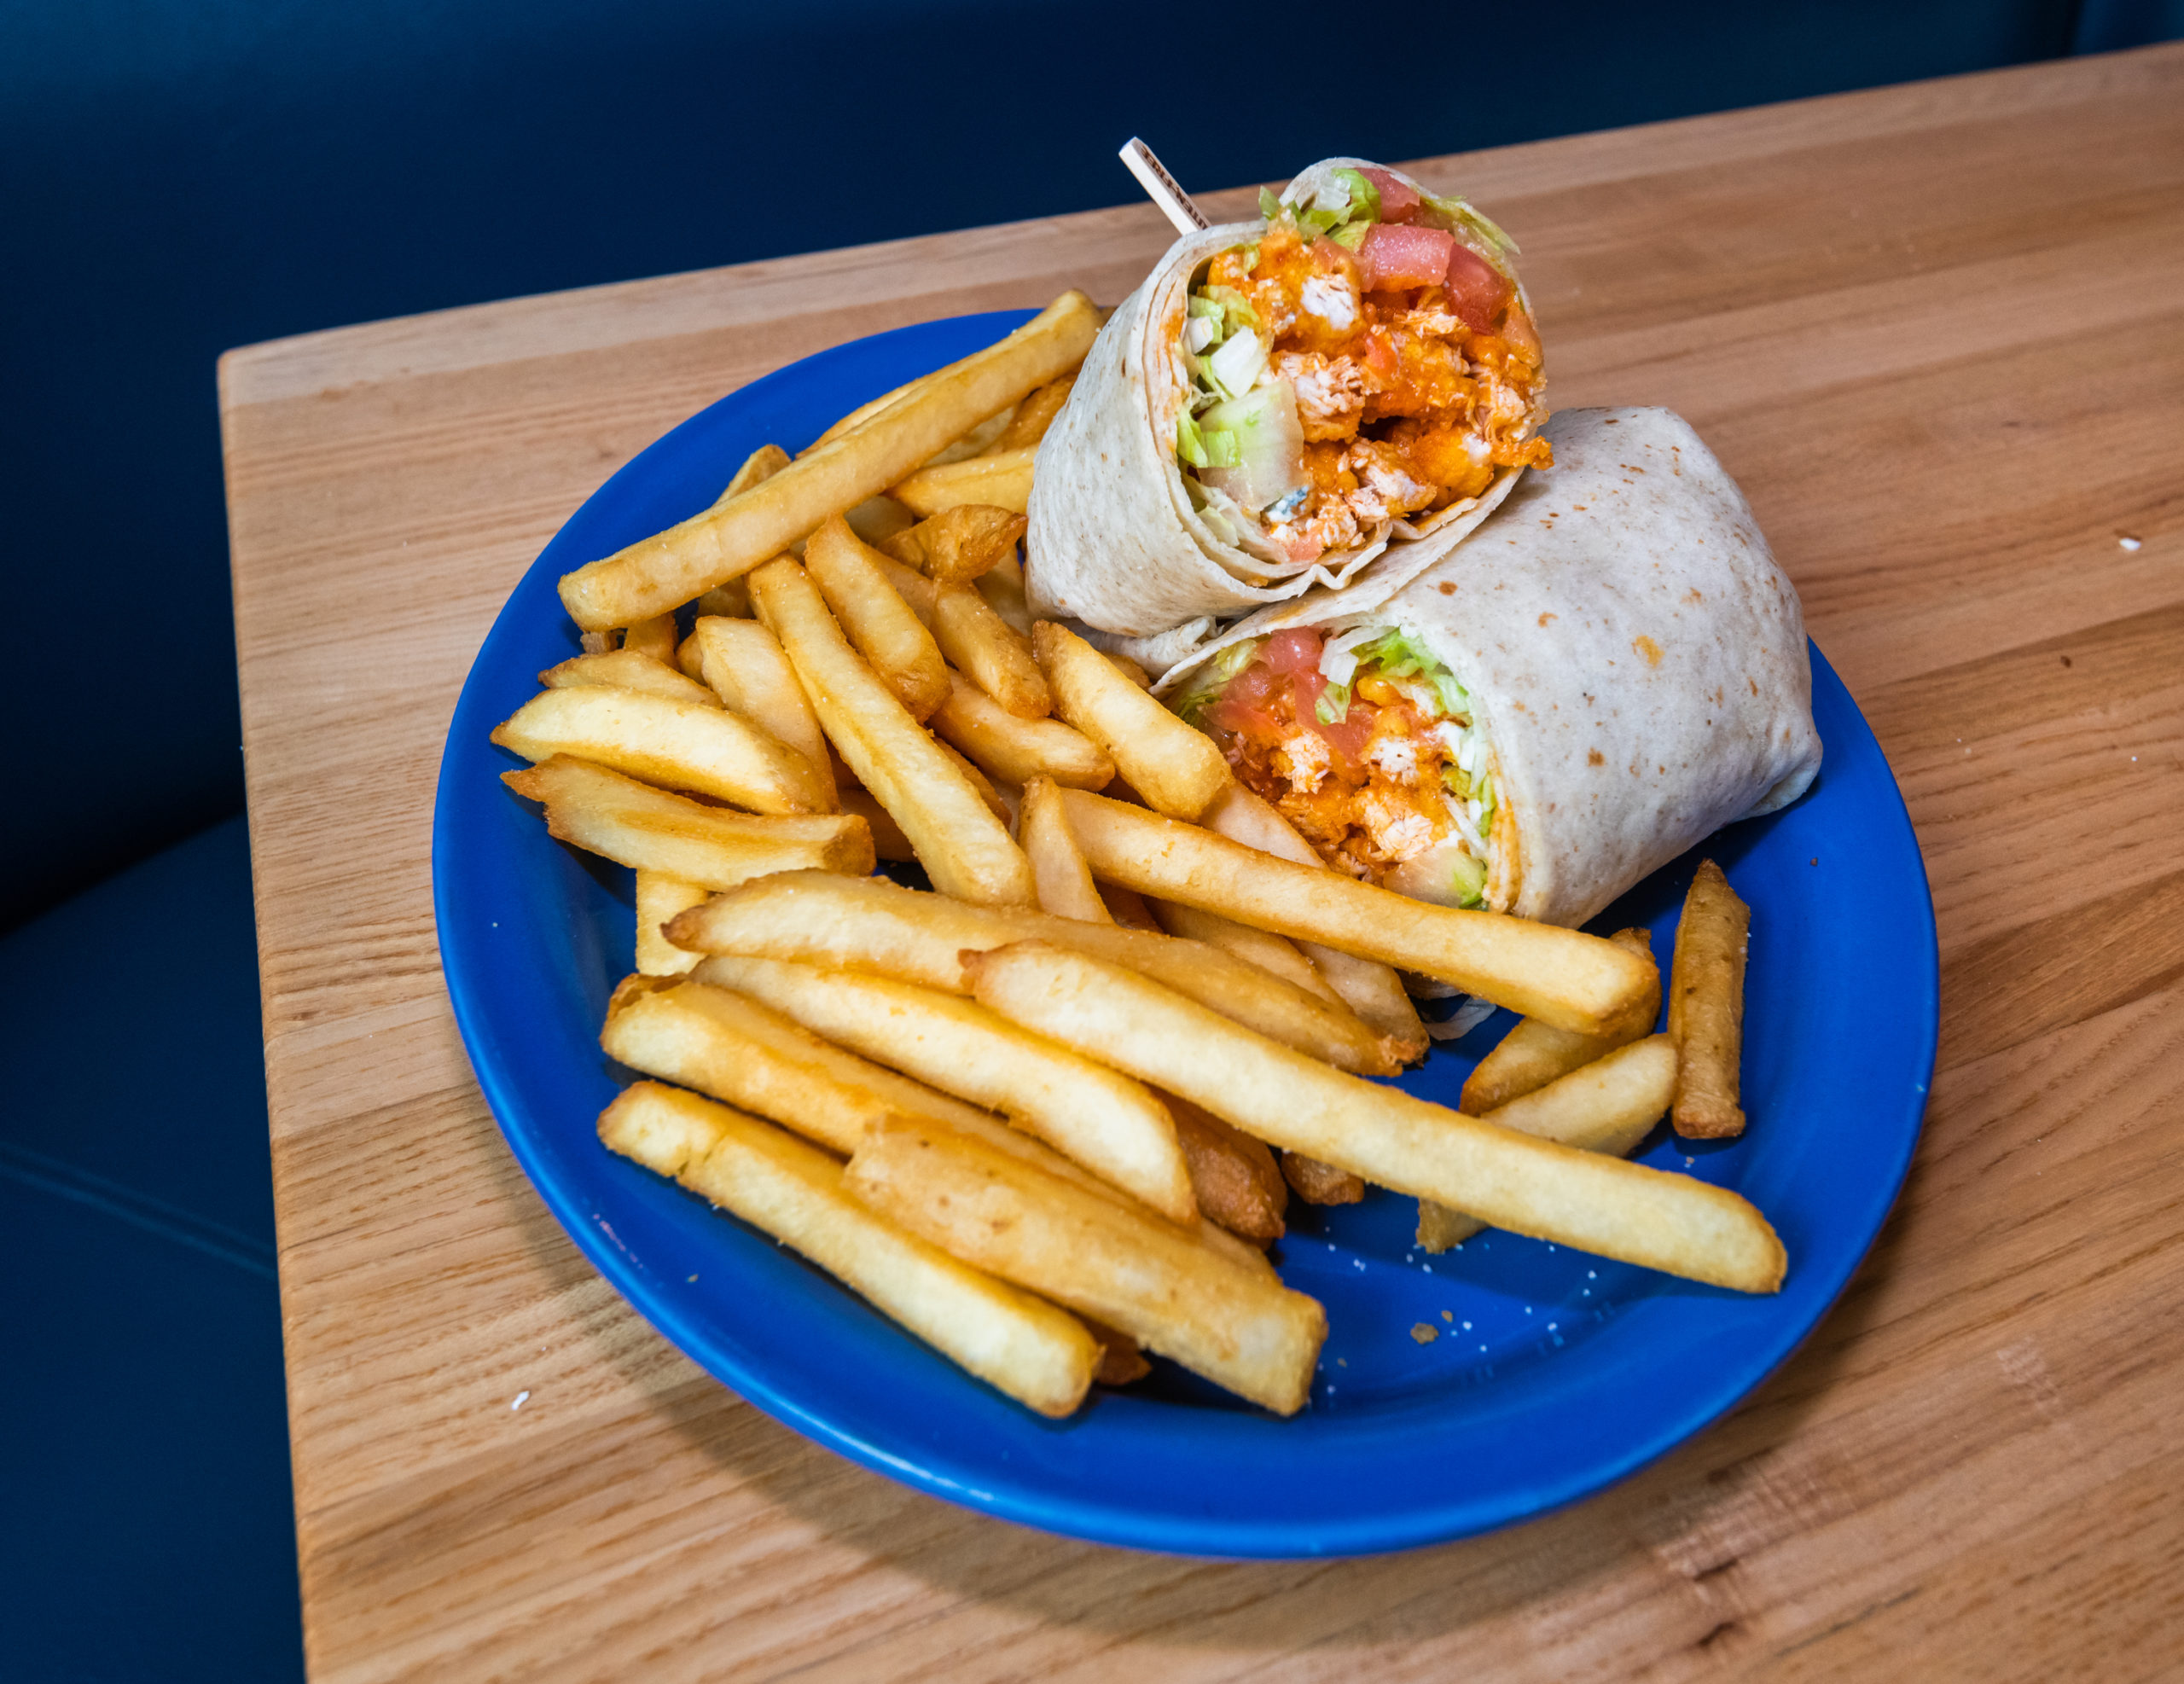 gluten free buffalo chicken wrap with french fries, the cabin restaurant